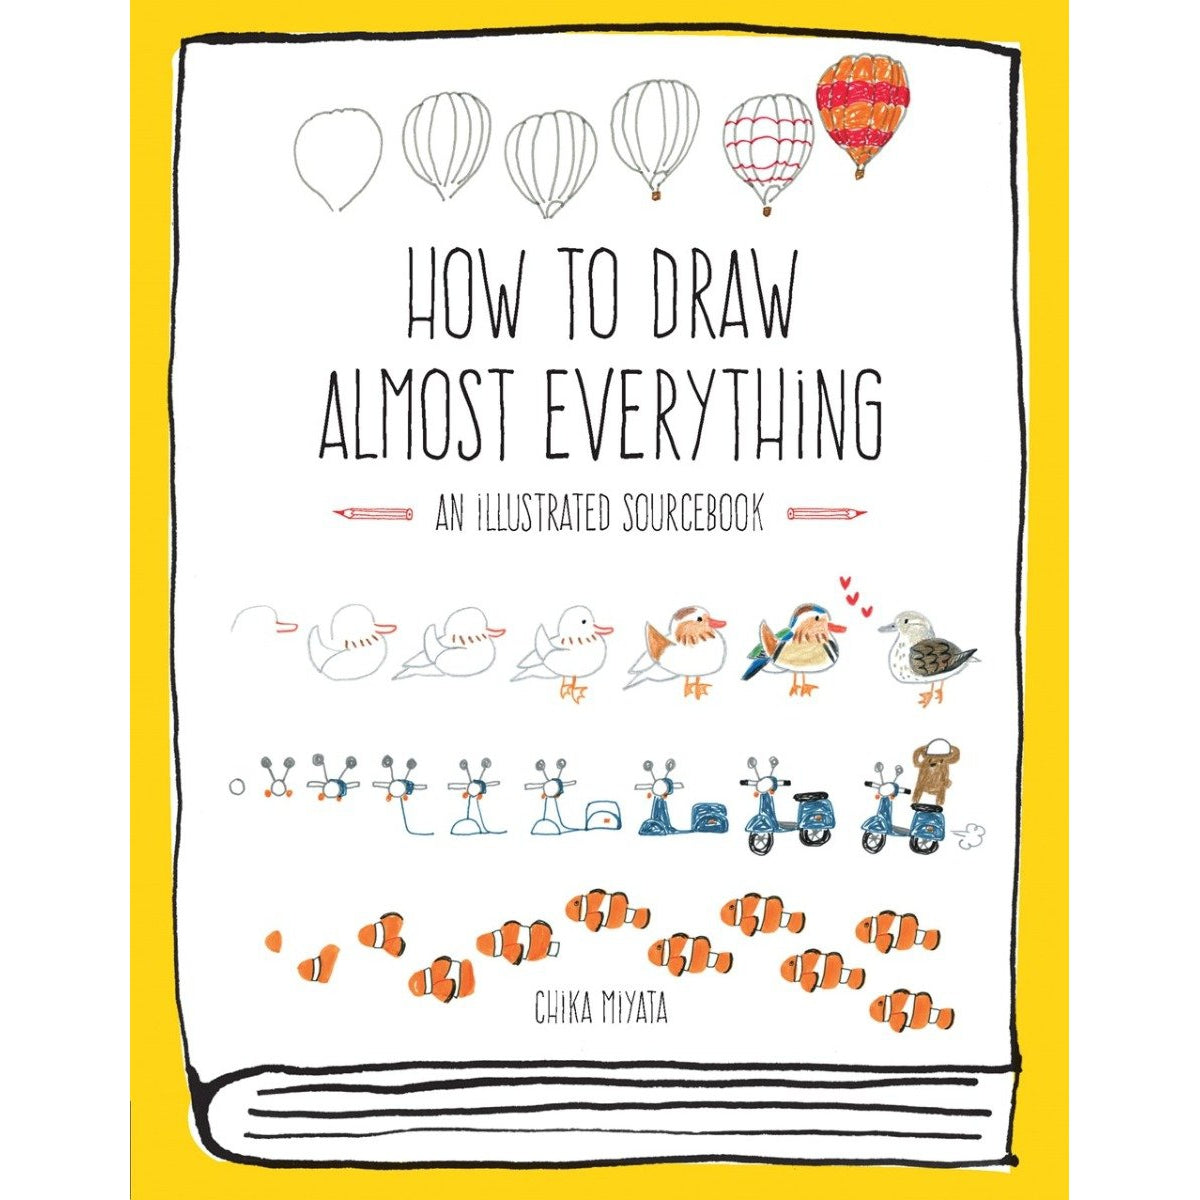 How to Draw Almost Everything's front cover.